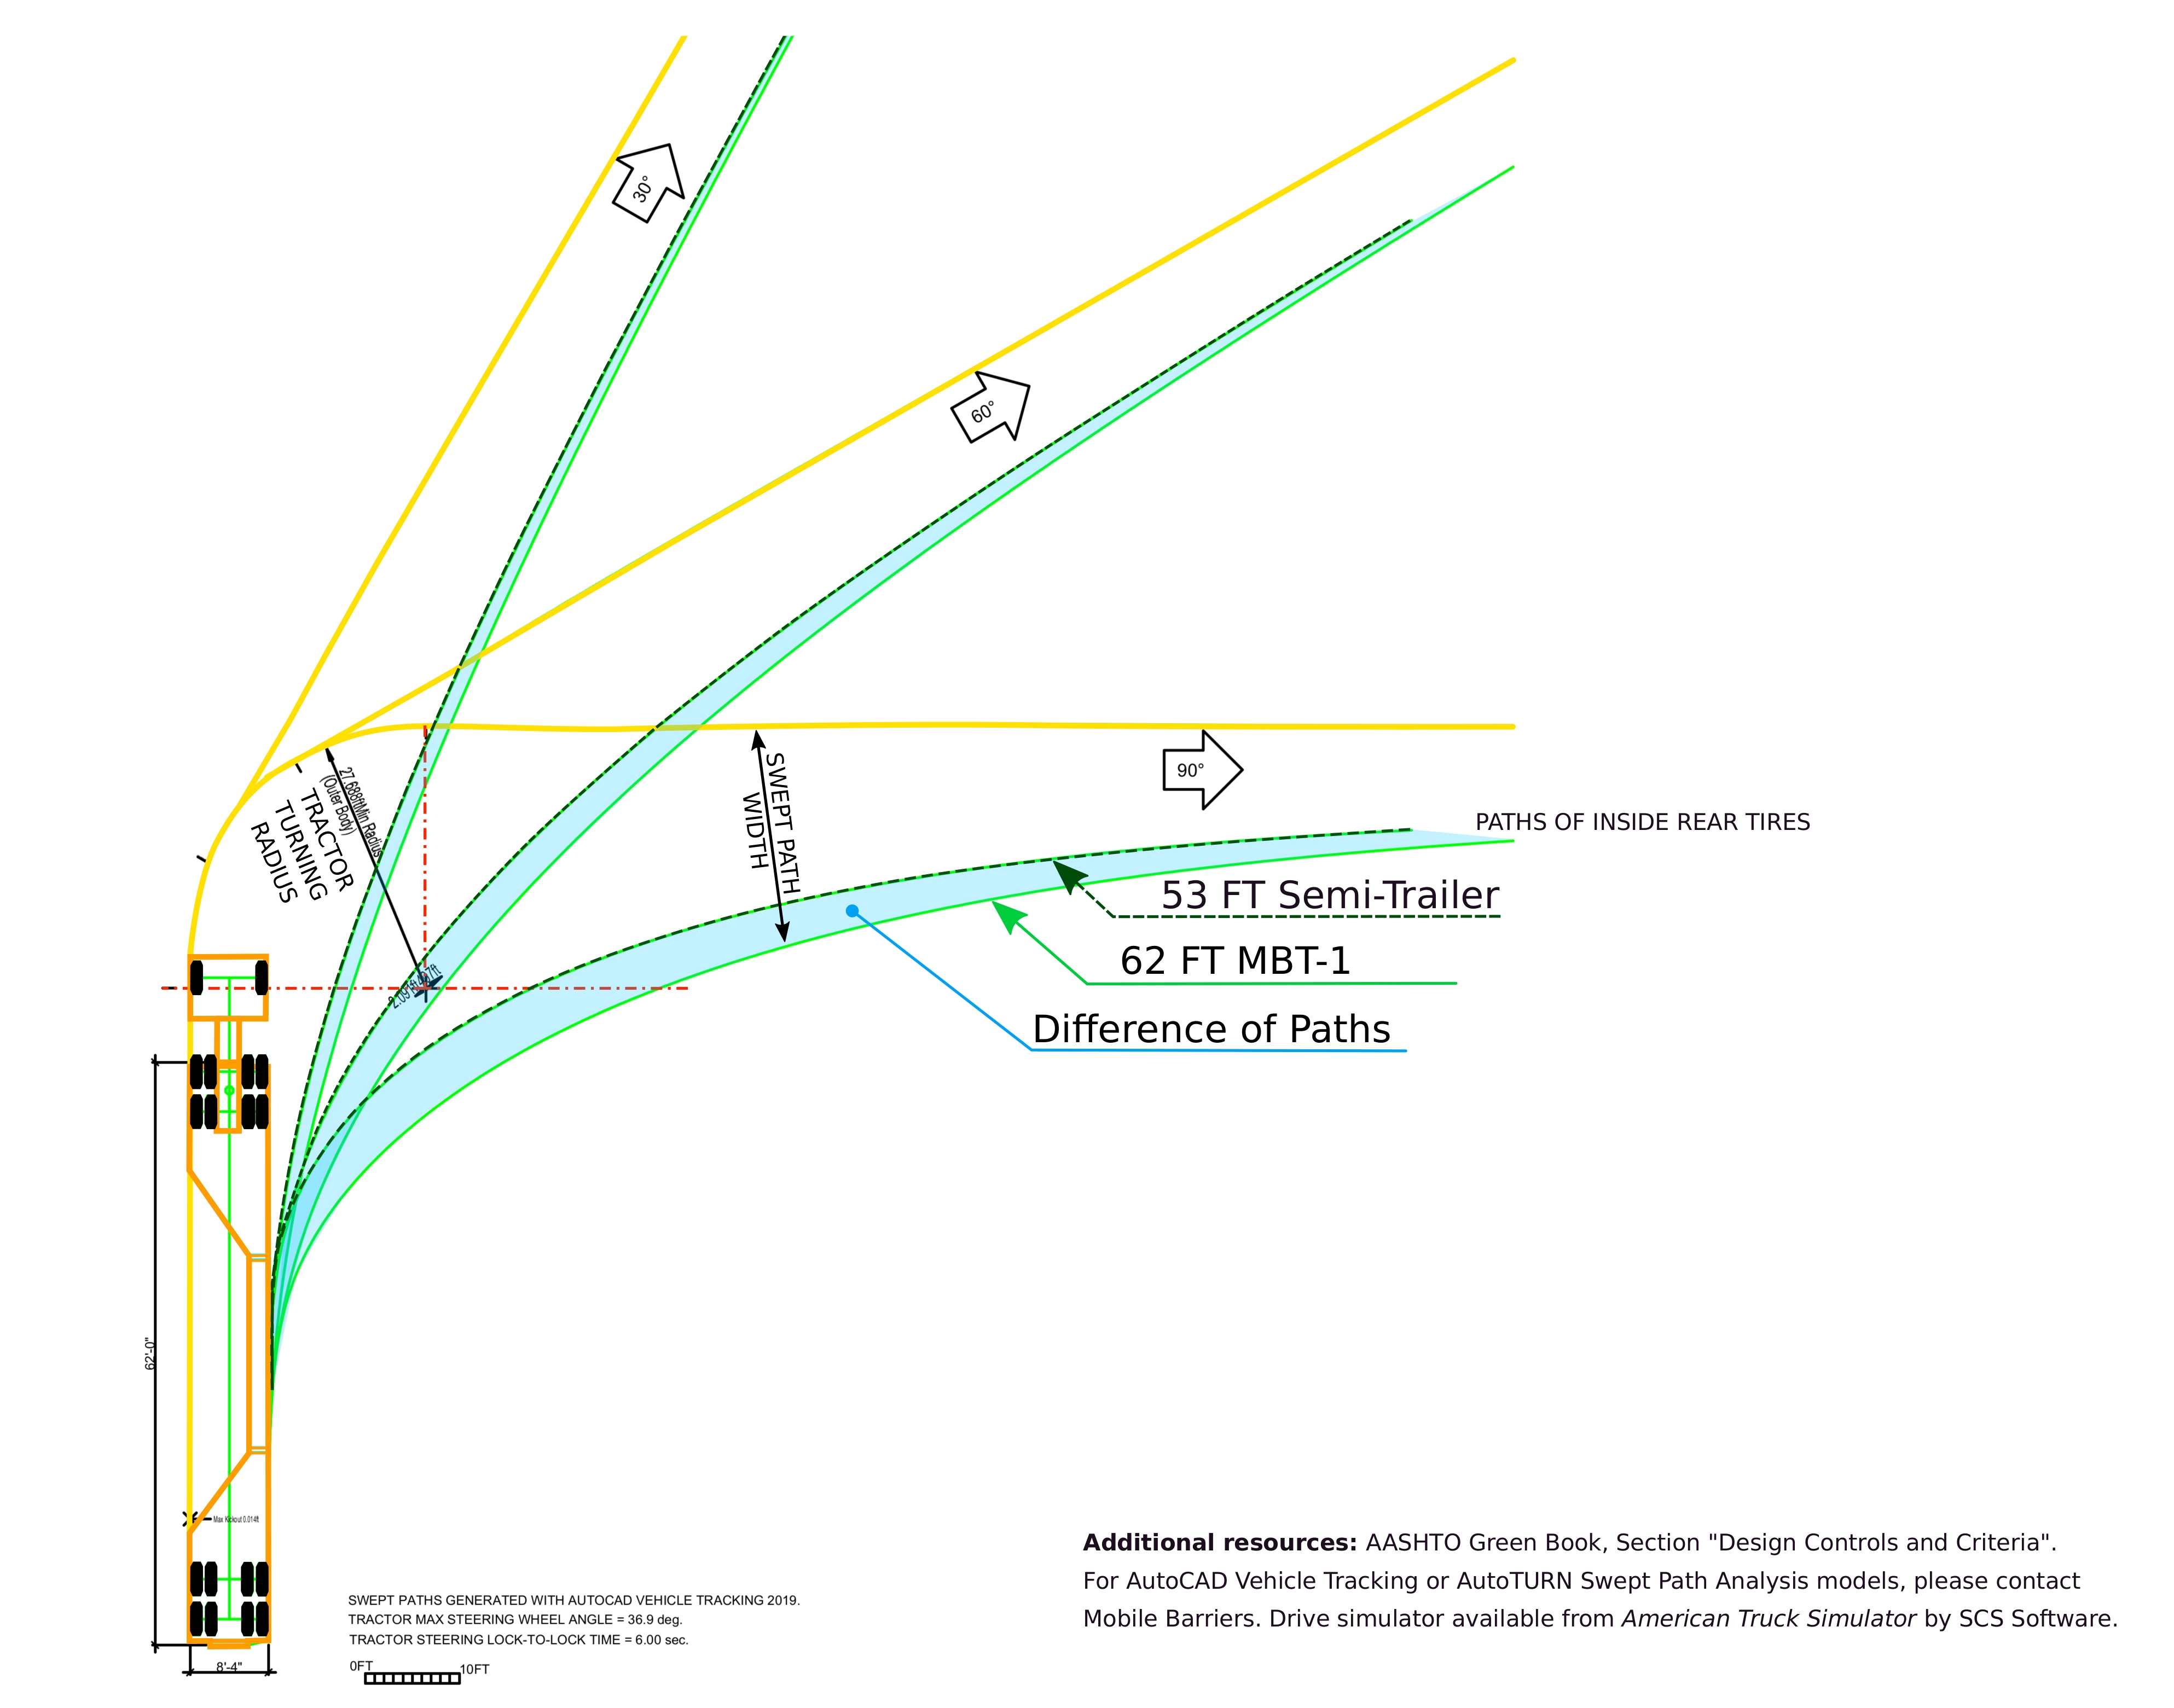 Comparison Illustration of Swept Paths for Mobile Barriers MBT-1 measuring 63 feet in length and Standard Semi-Trailer measuring 53 feet in length.